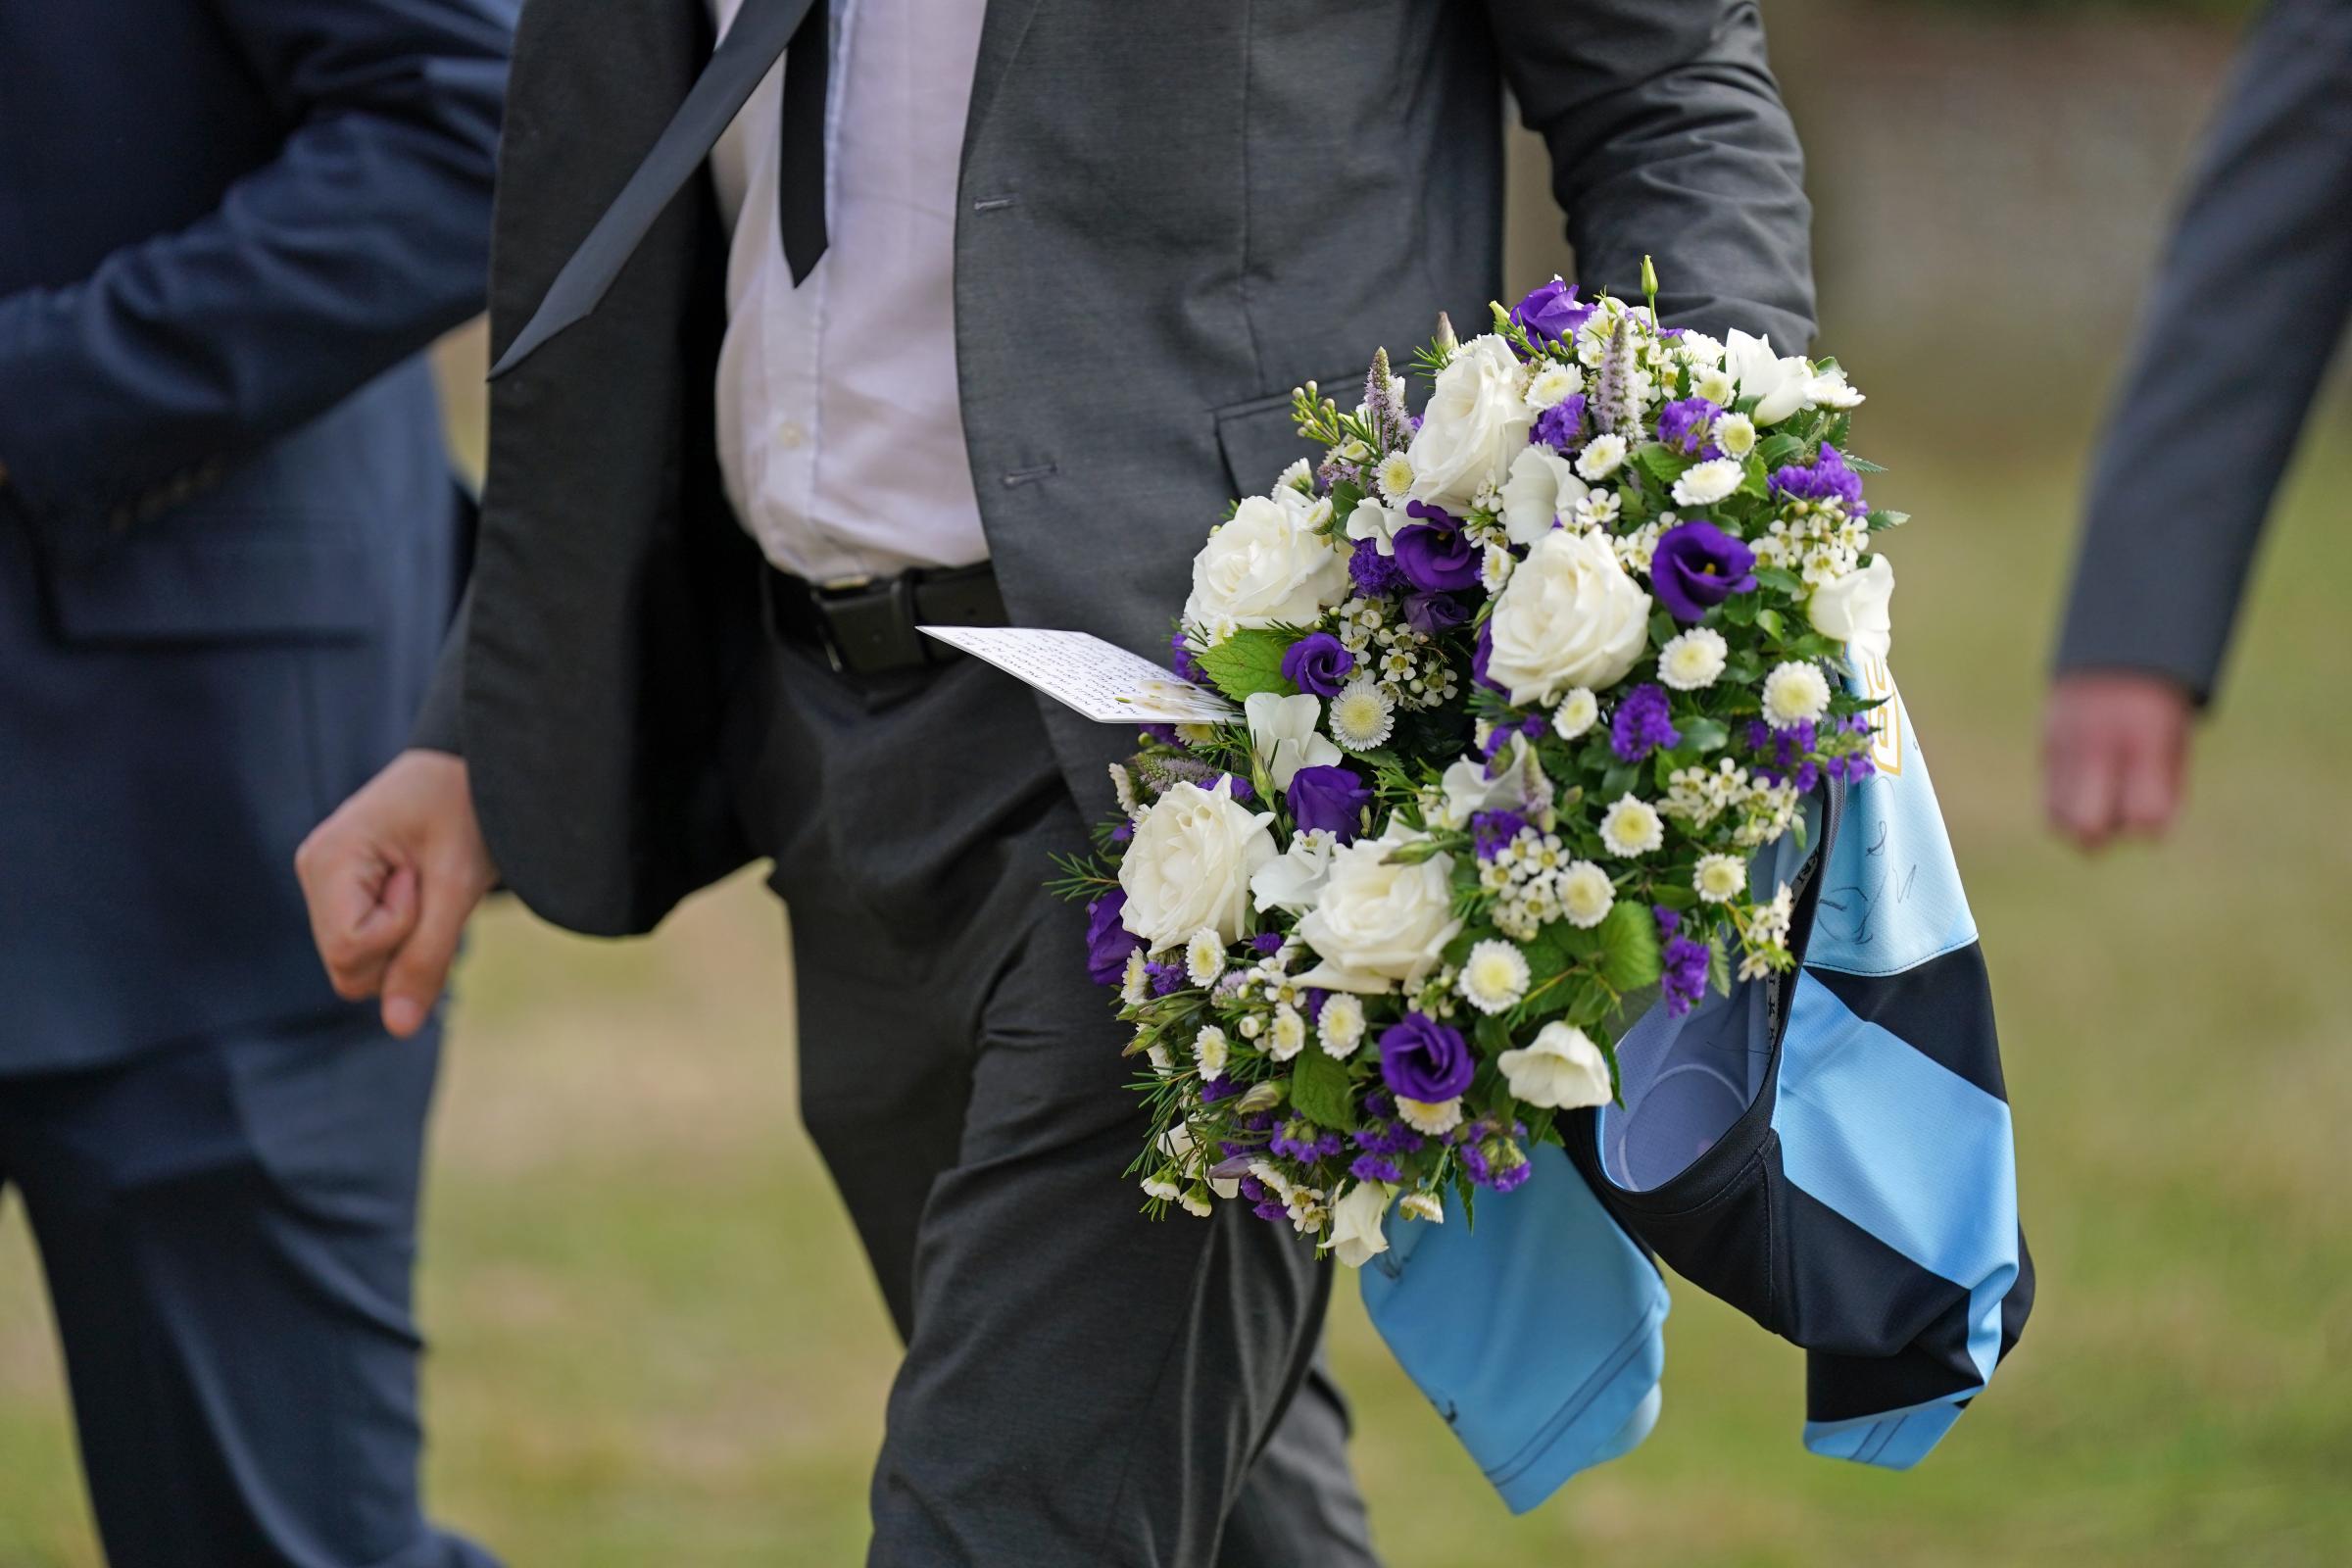 A mourner carrying a bouquet of flowers with a Wycombe Wanderers football shirt arrives for the funeral of TV presenter and journalist Bill Turnbull at Holy Trinity Church in Blythburgh, Suffolk (PA)